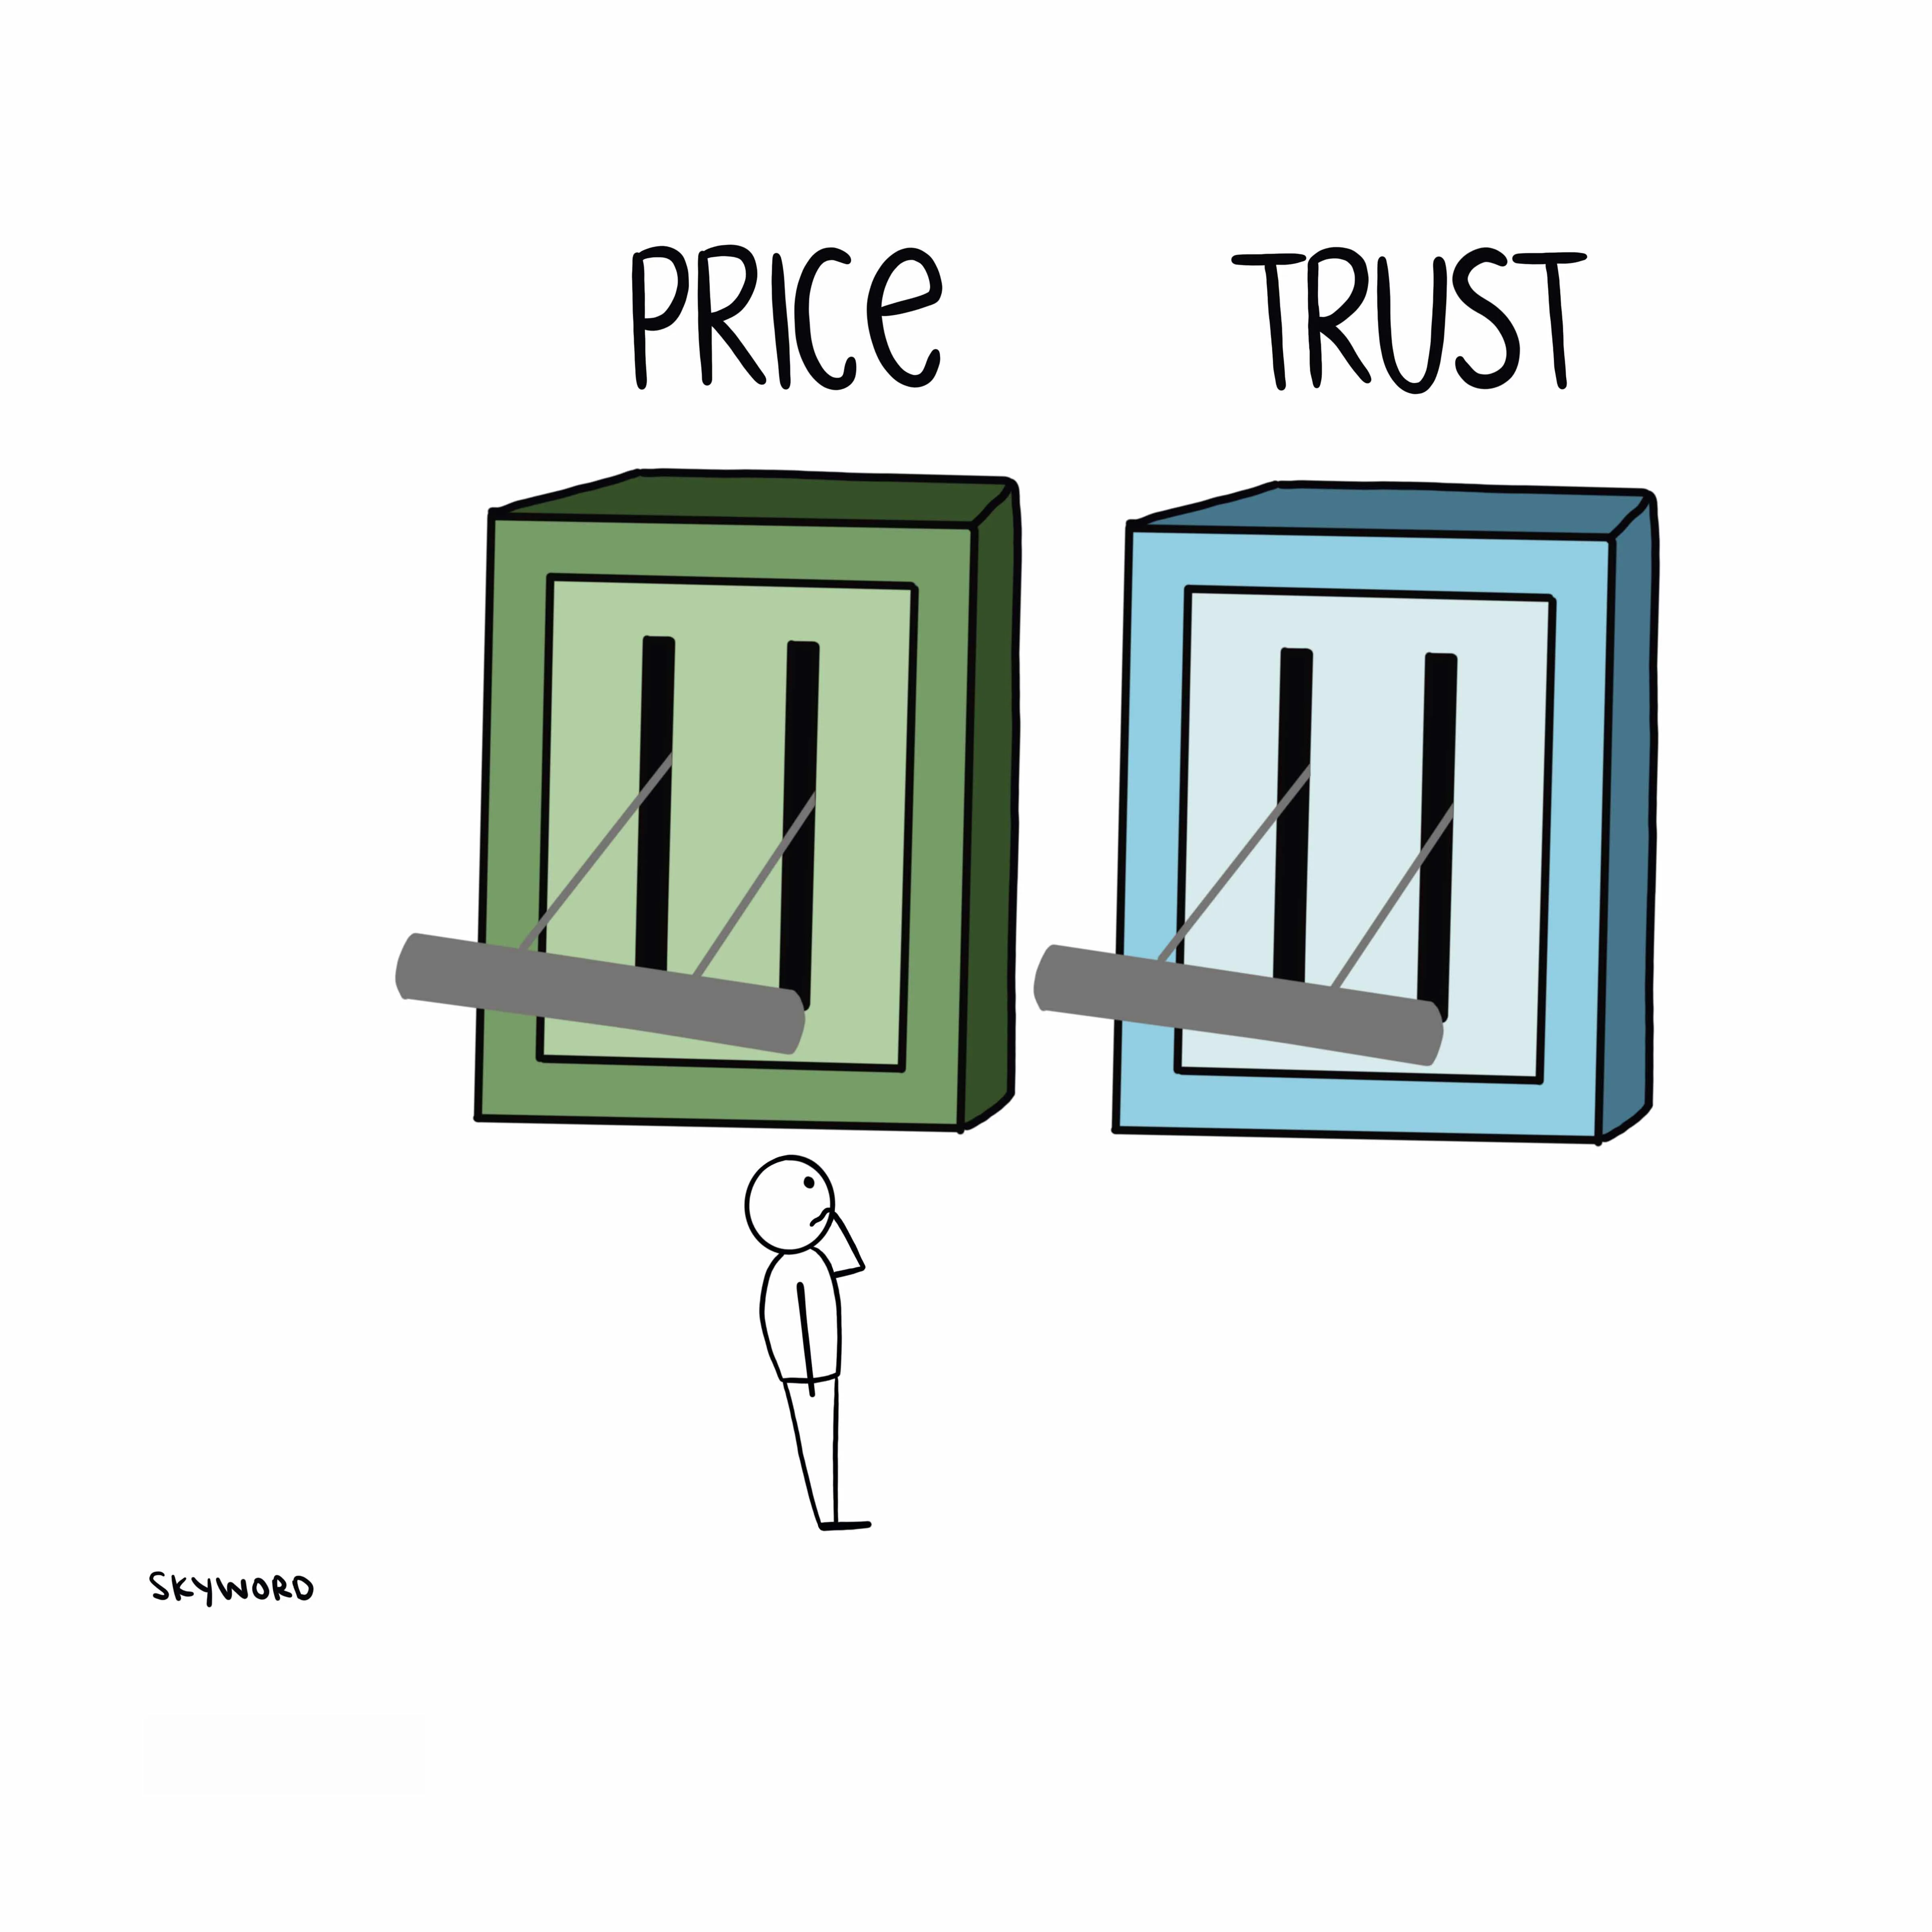 Price and trust levers